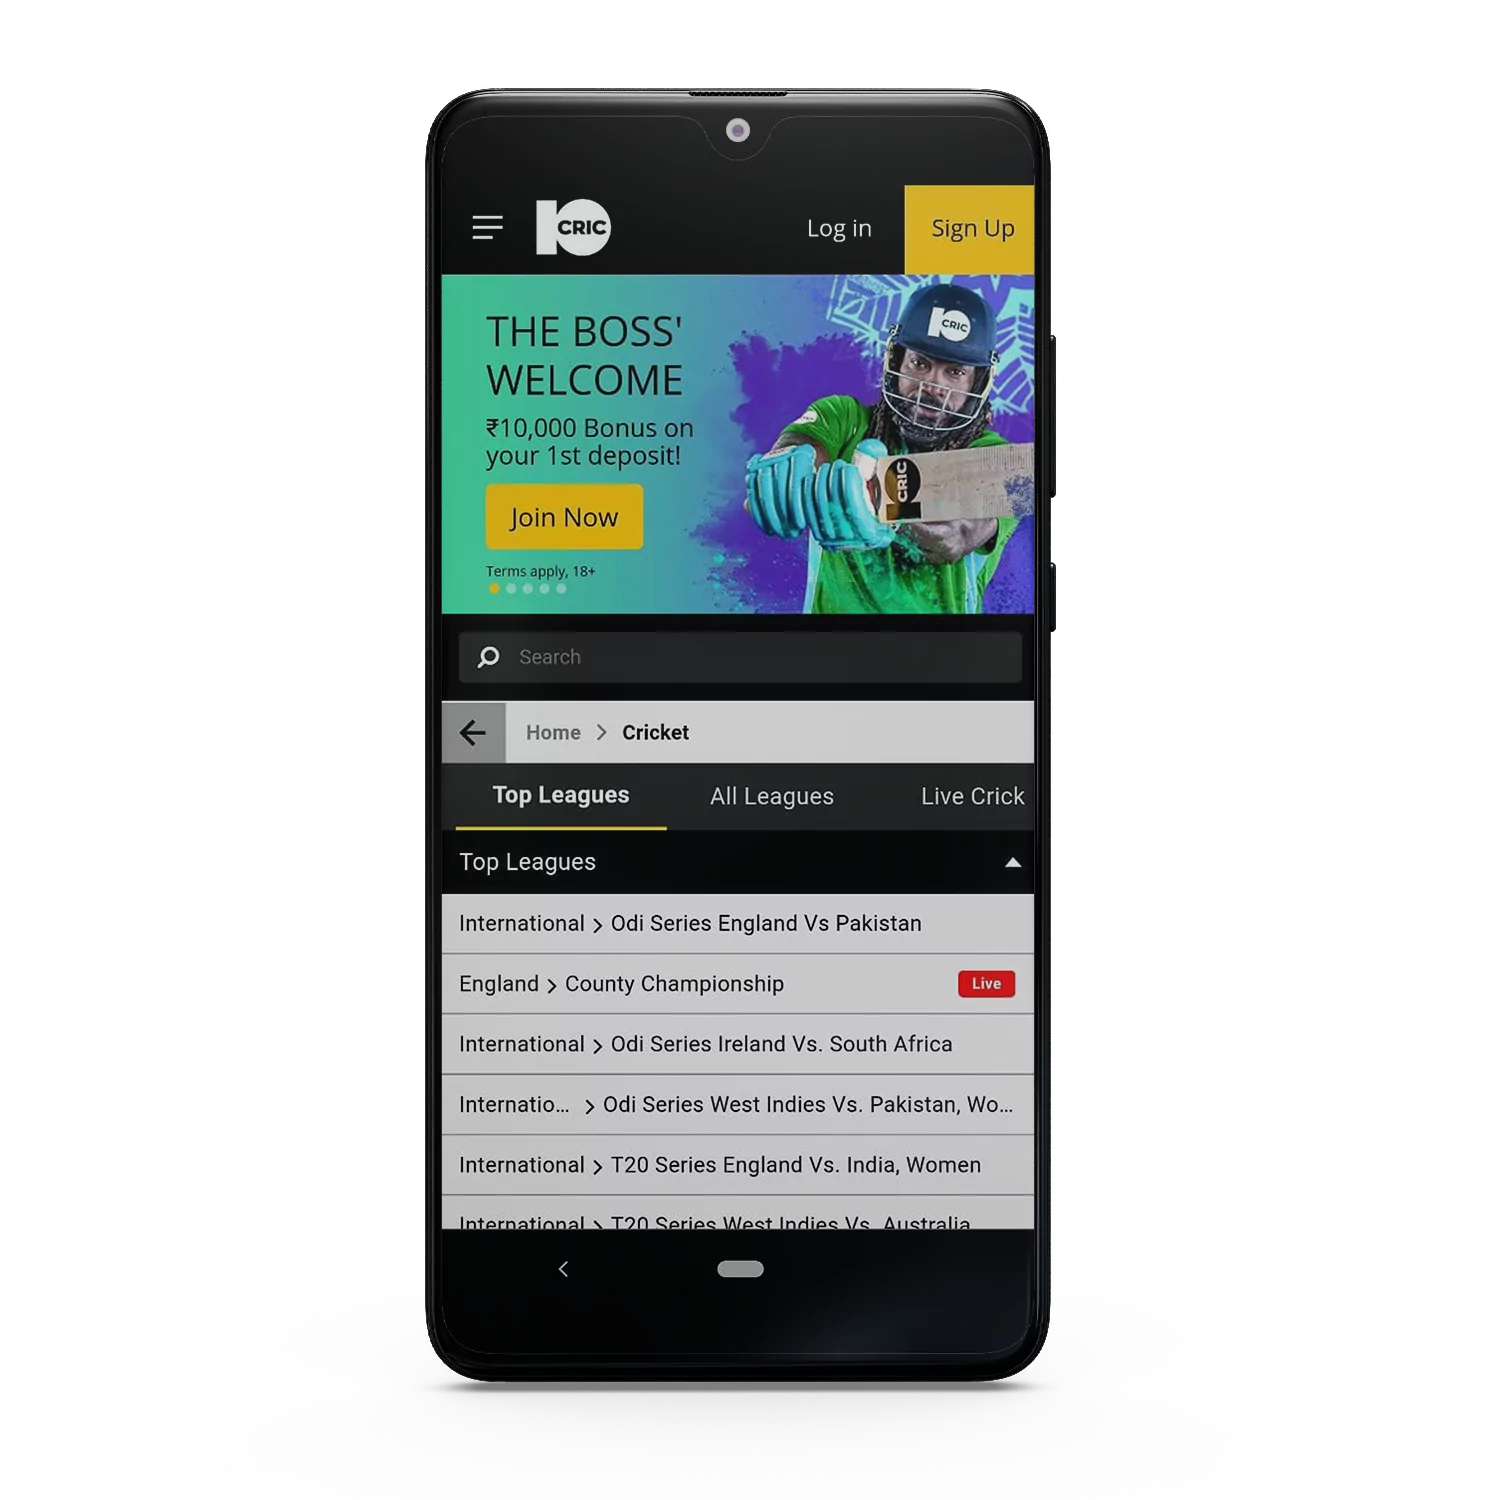 The 10Cric app is available for Android and iOS.